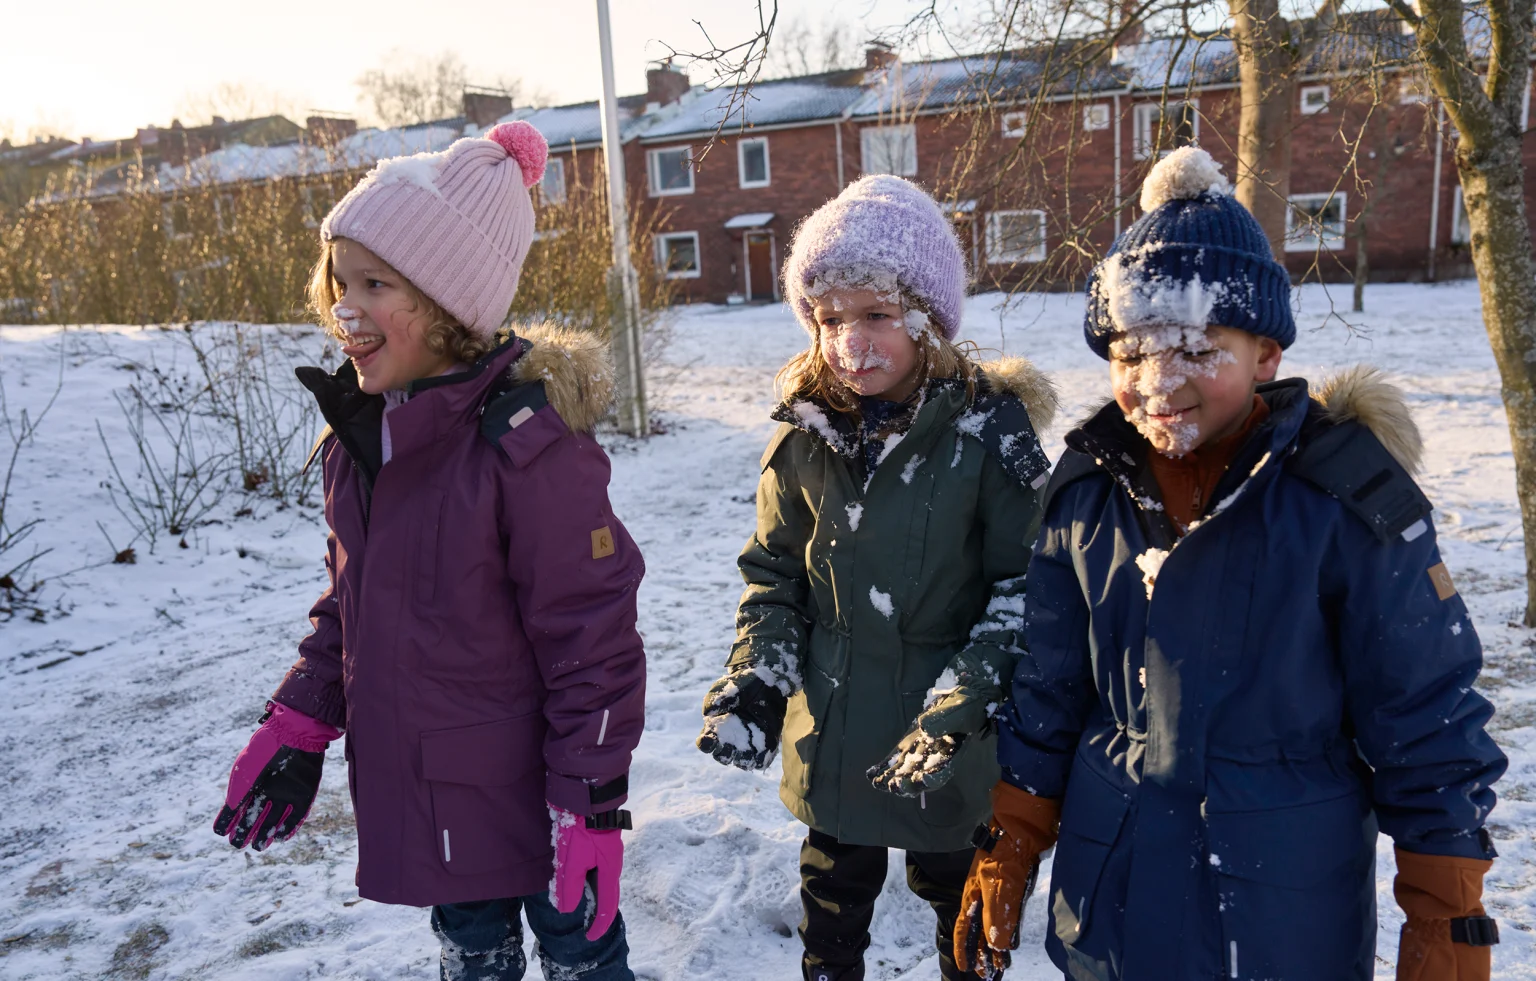 Children-playing-with-their-hats-and-gloves-covered-in-snow.jpg